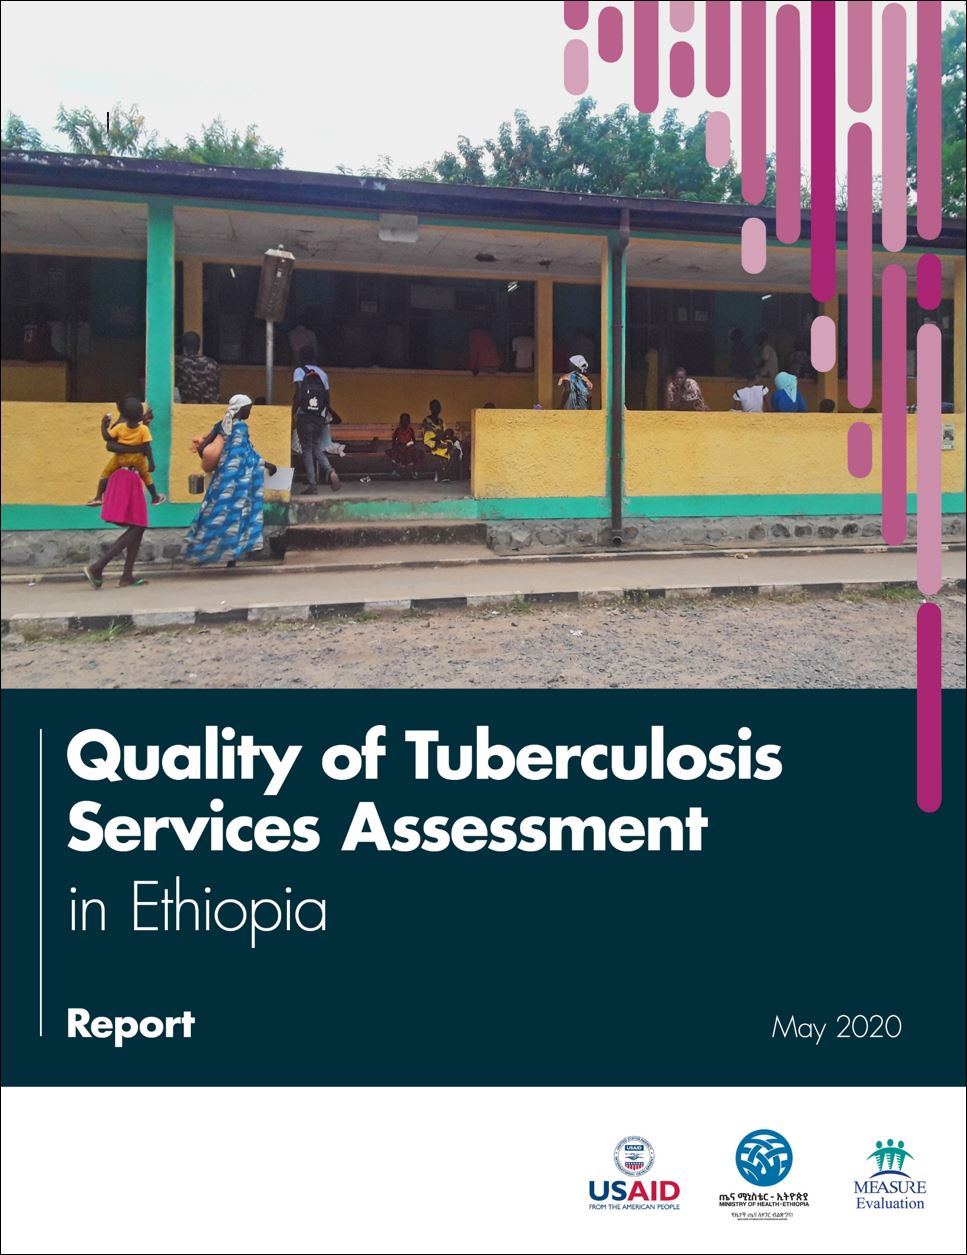 Quality of Tuberculosis Services Assessment in Ethiopia: Report